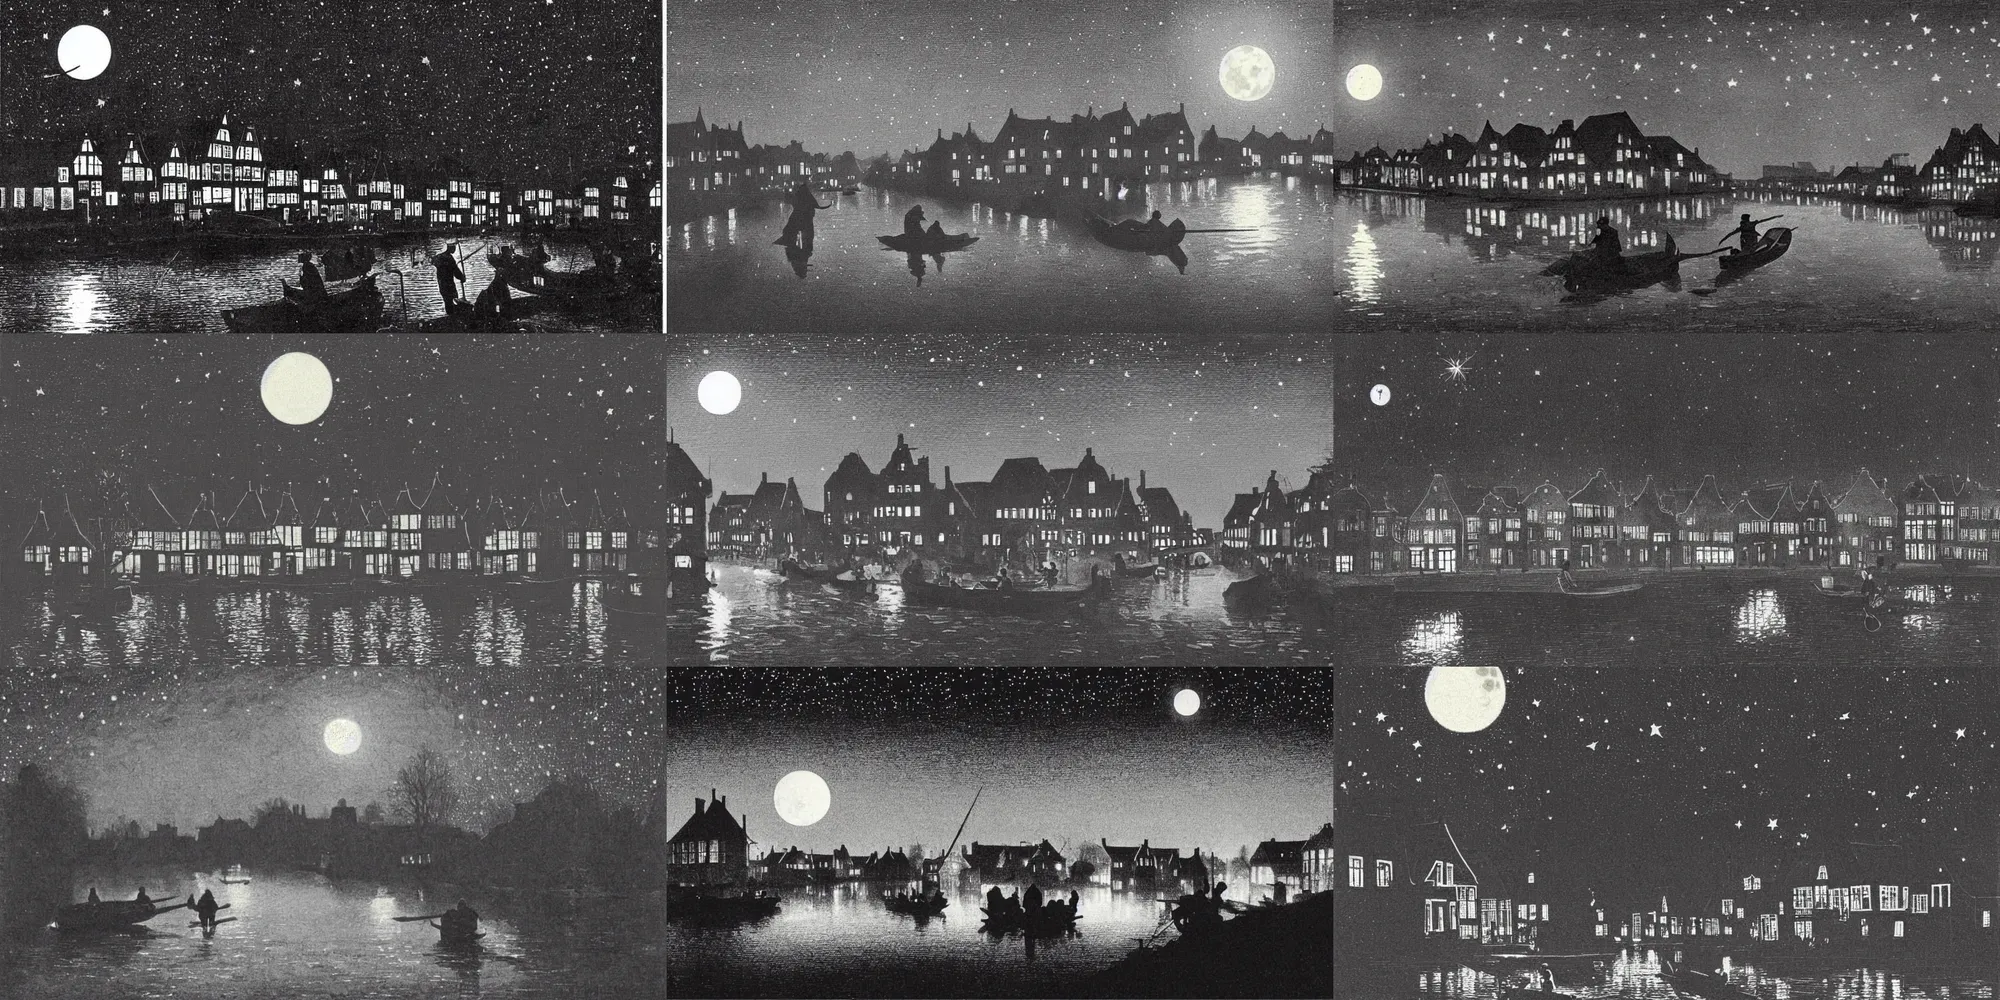 Prompt: Dutch houses along a river, silhouette!!!, Circular white full moon, black sky with stars, lit windows, stars in the sky, b&w!, Reflections on the river, a man is punting, flat!!, Front profile!!!!, street lanterns, 1904, Style of Frank Weston, illustration,luminance